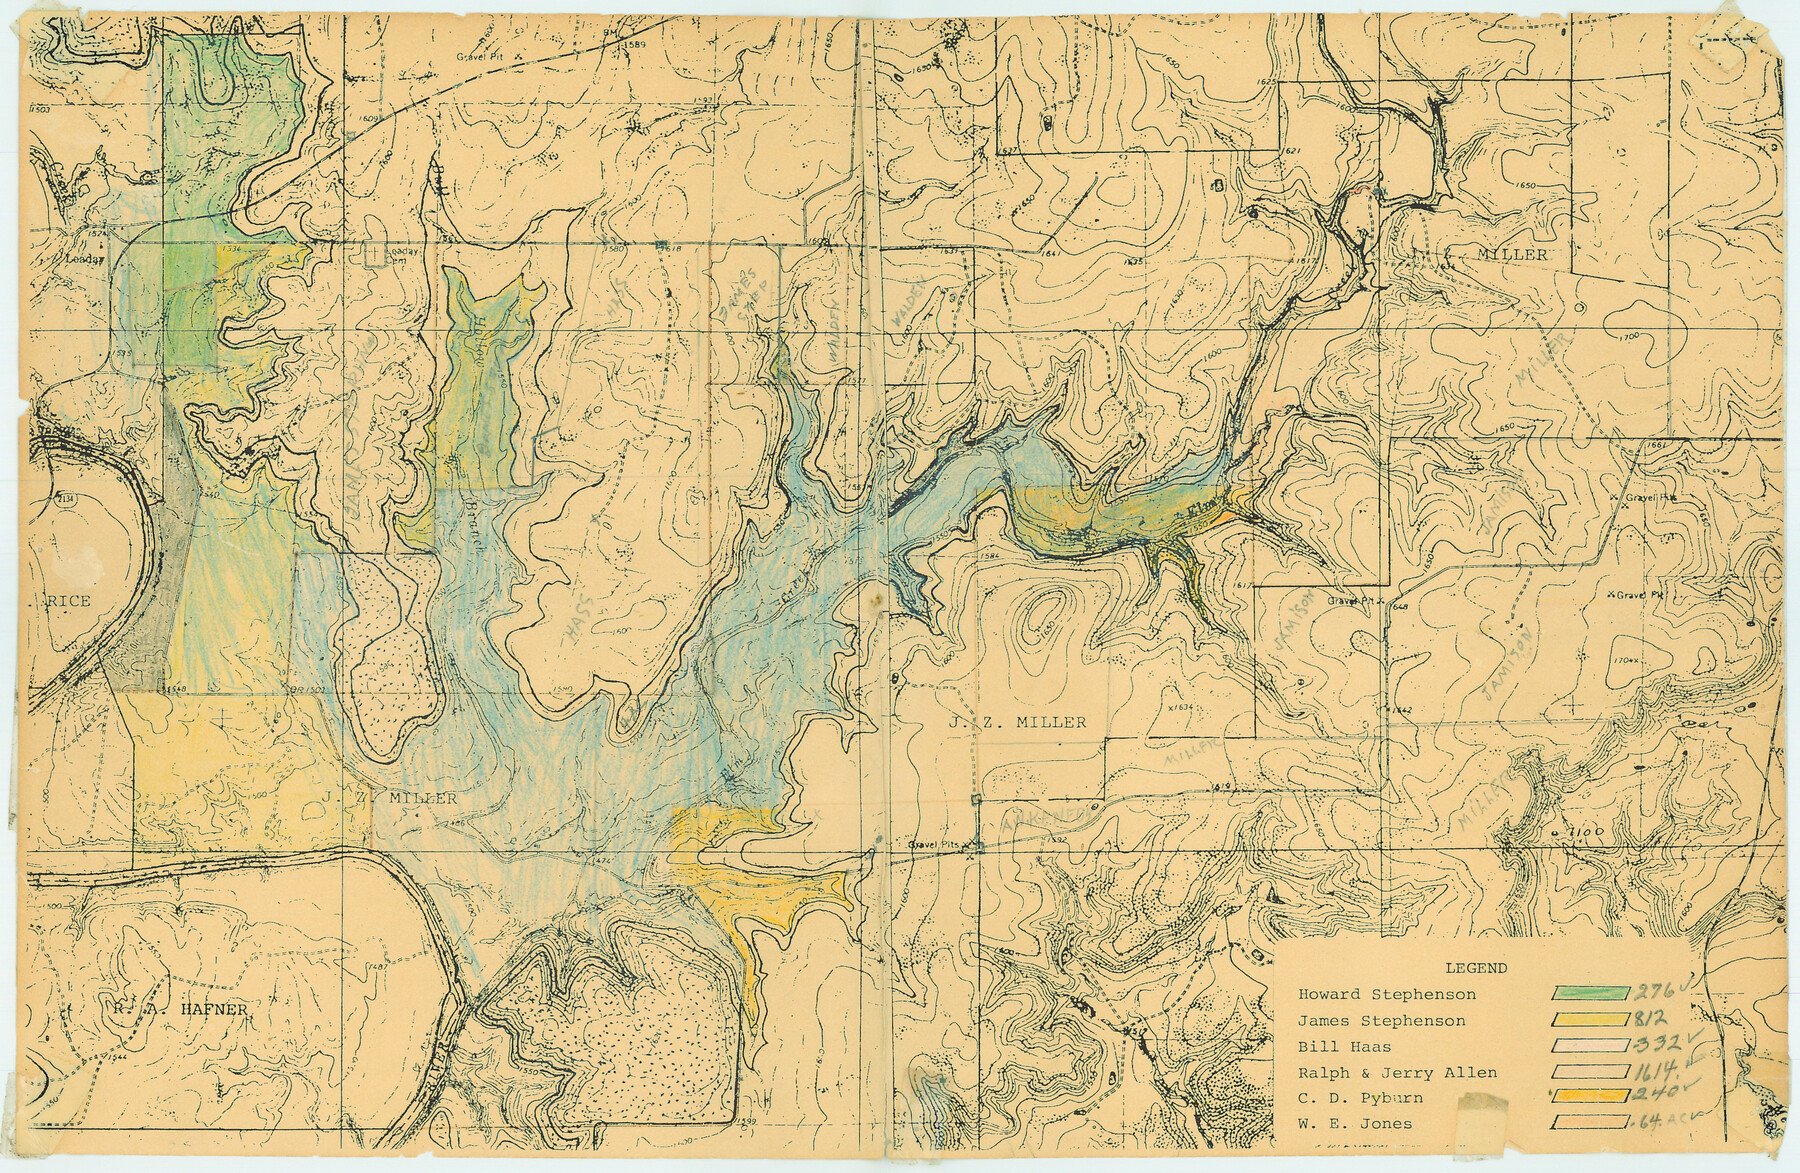 81515, [Topographical Map showing part of Miller Day Ranch in Southwest Part of Coleman County], General Map Collection